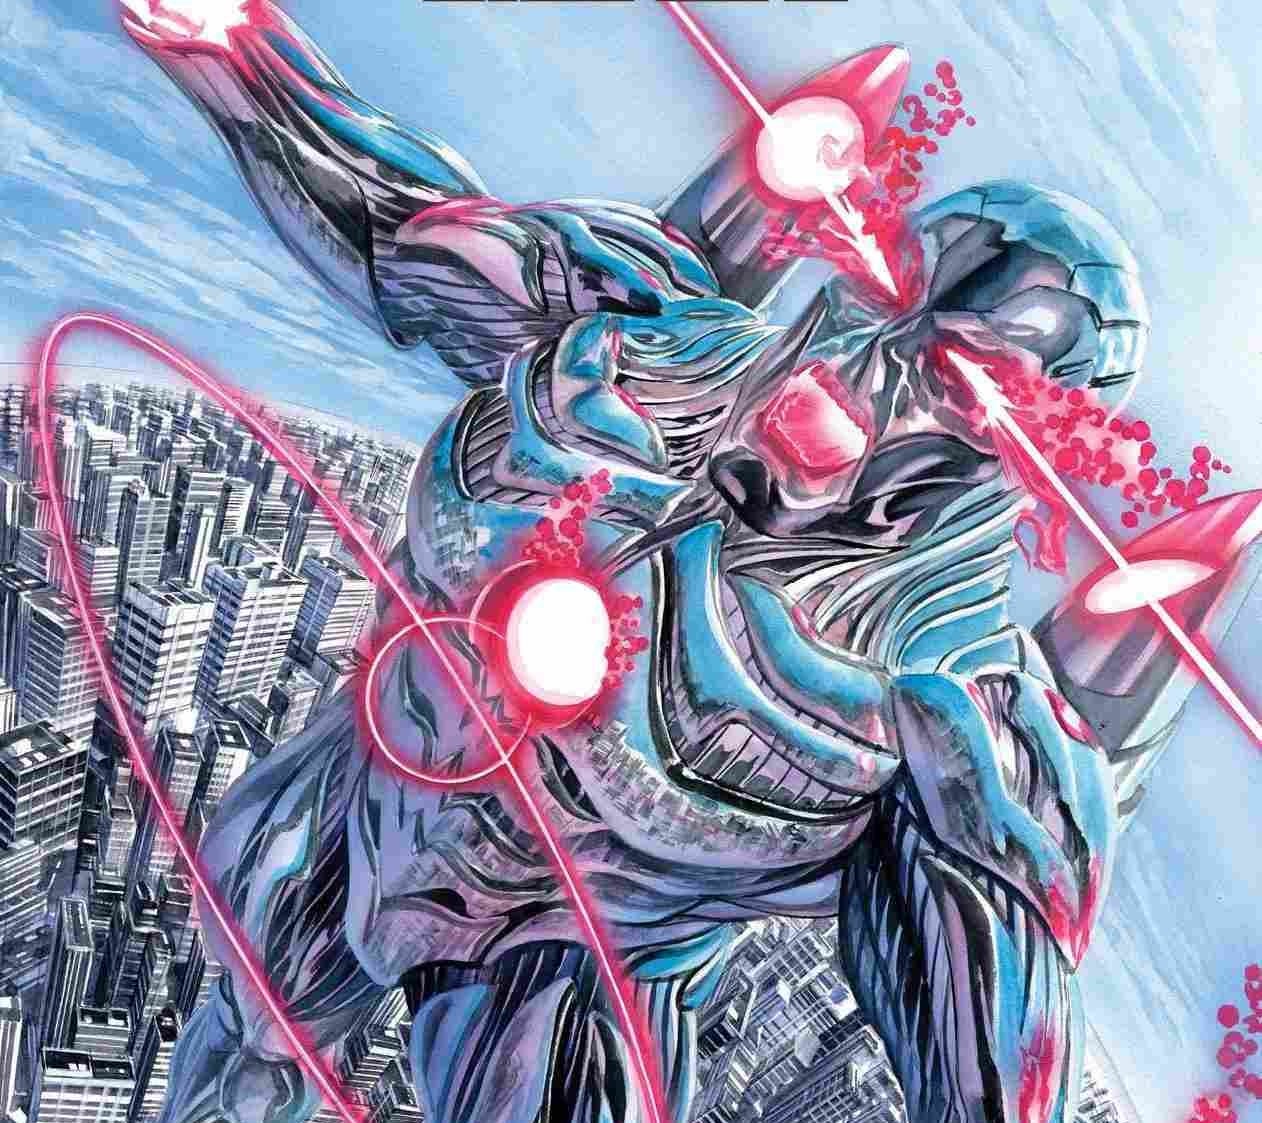 'Iron Man' #14 is a trippy issue that tests Tony Stark in a new way